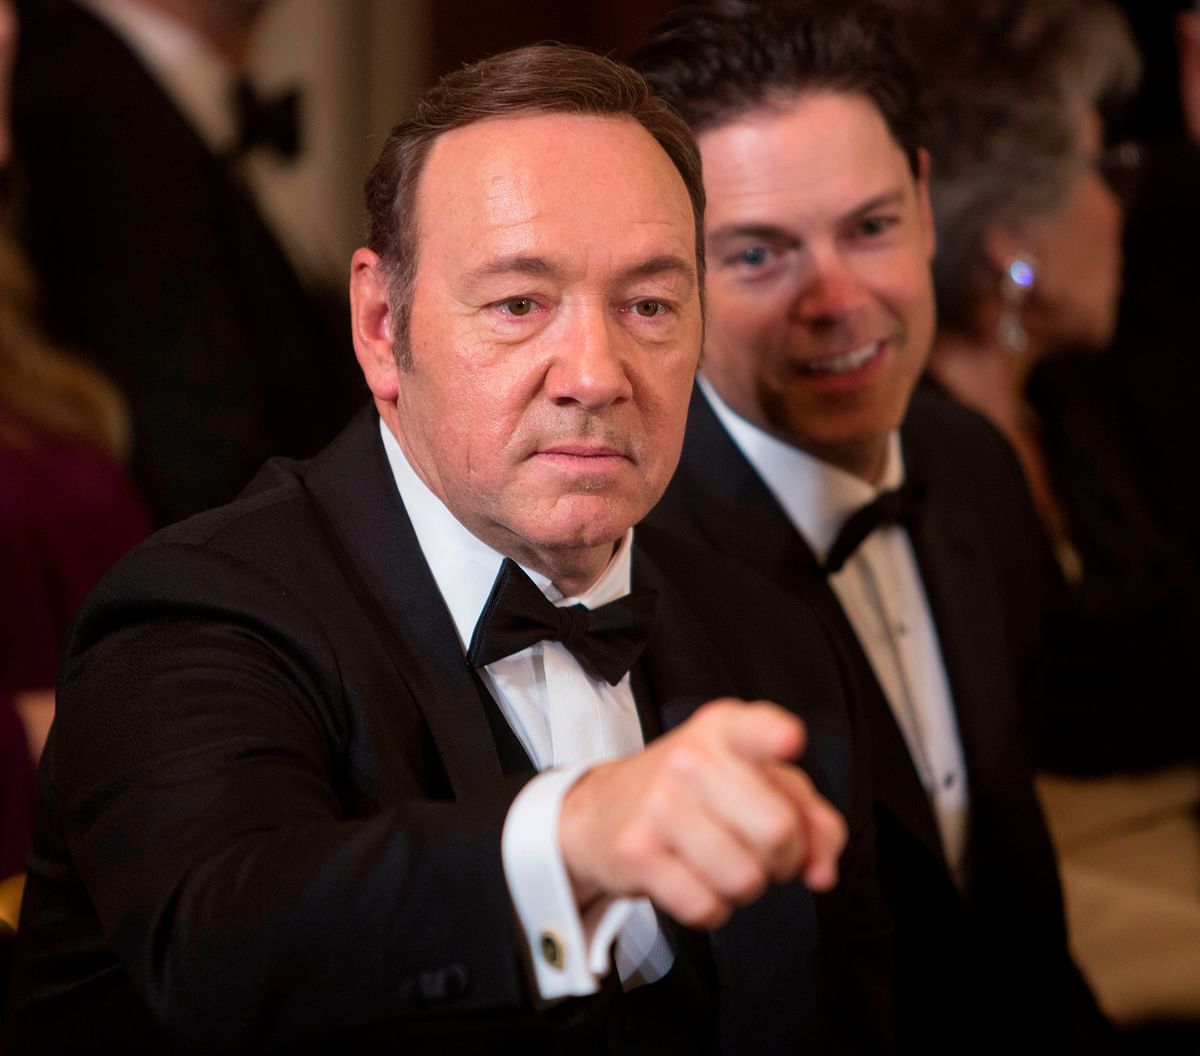 In this file photo taken on 4 December 2016, actor Kevin Spacey acknowledges another guest during a reception for the 2016 Kennedy Center Honorees at the White House in Washington, DC. Photo: AFP